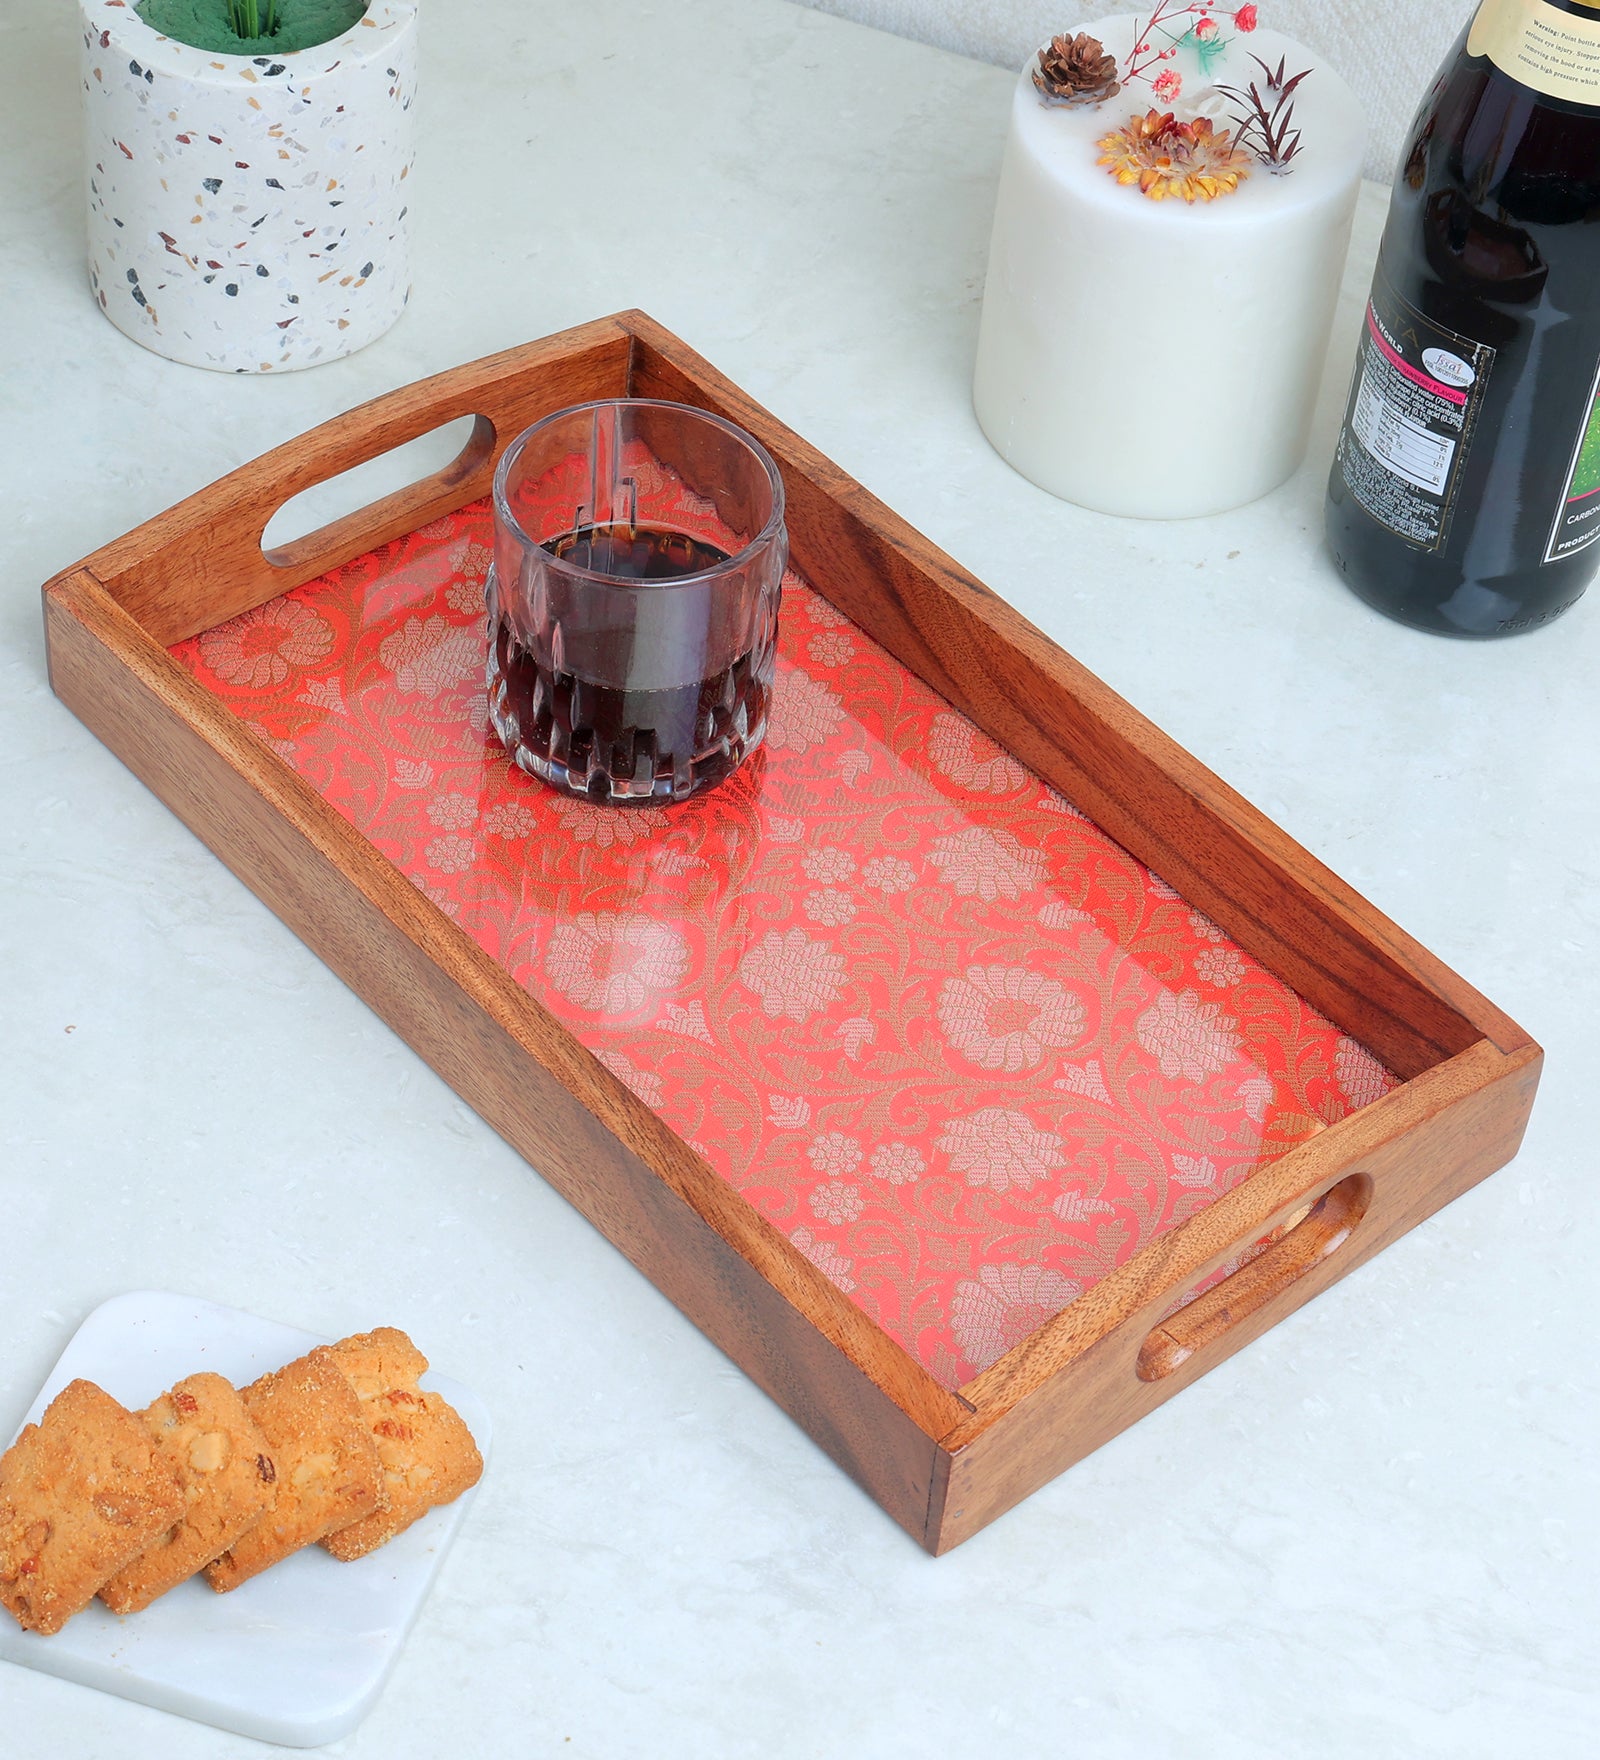 stunning wooden serving tray 14"X 8"